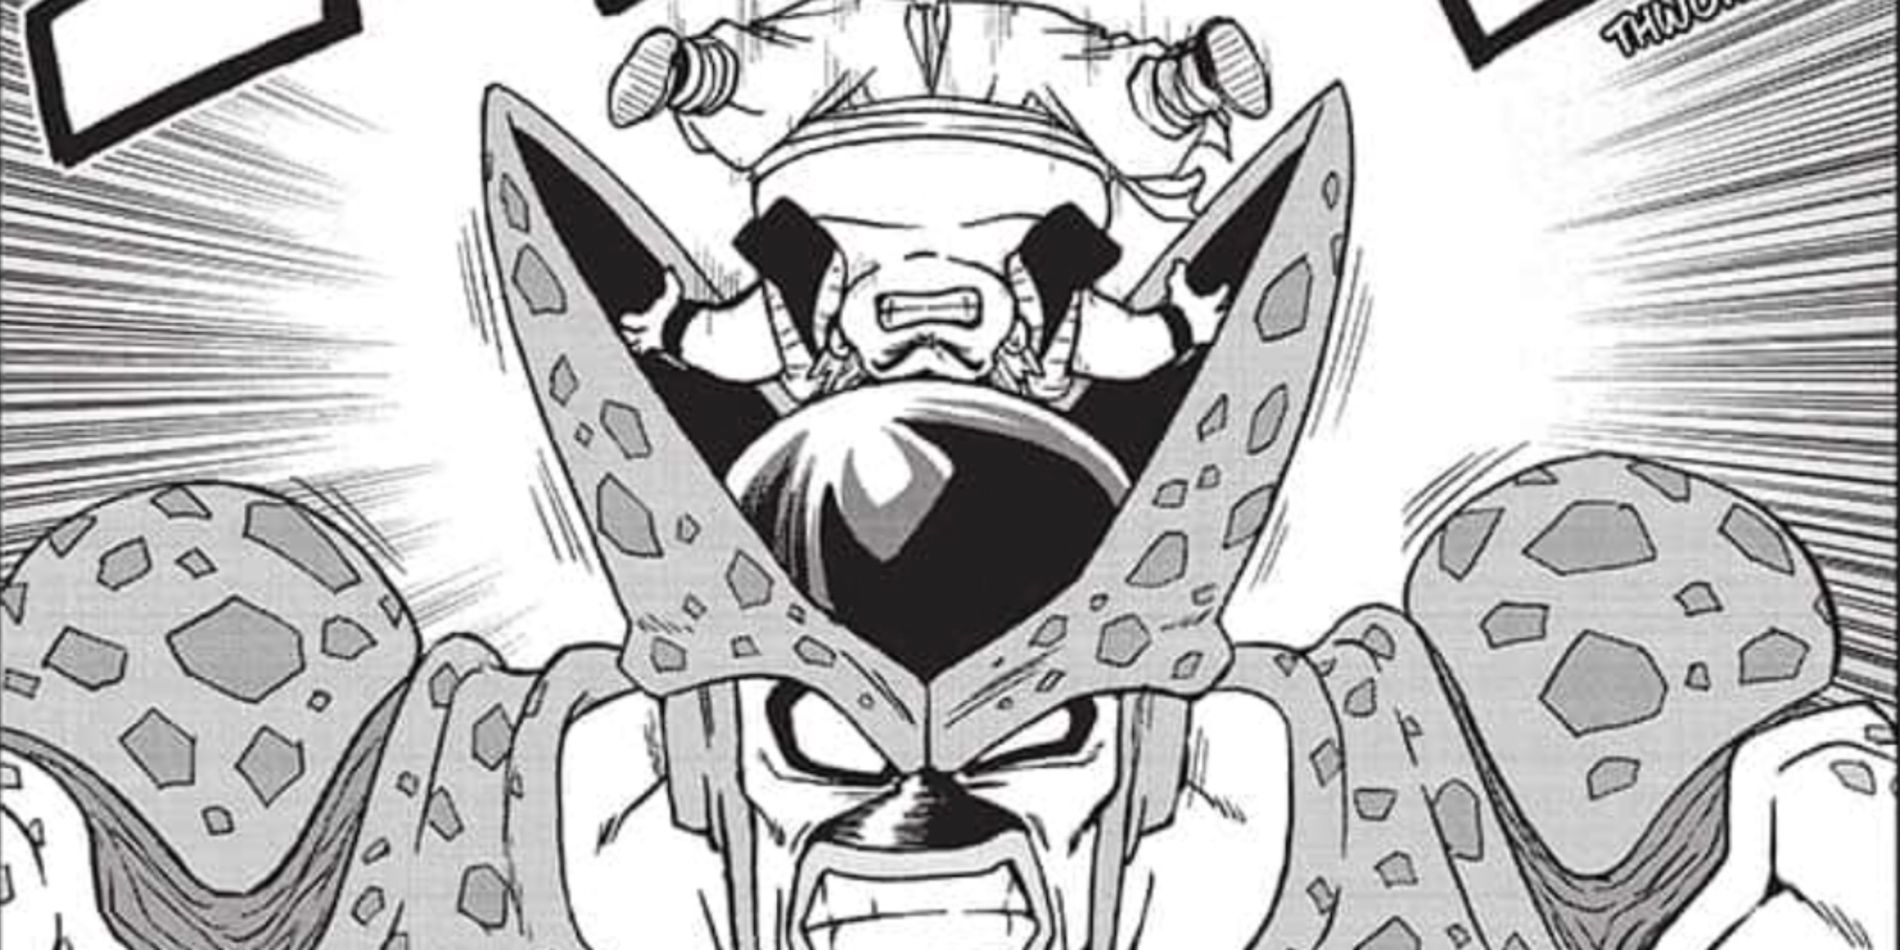 Gotenks head butts Cell Max in Chapter 98 of Dragon Ball Super manga